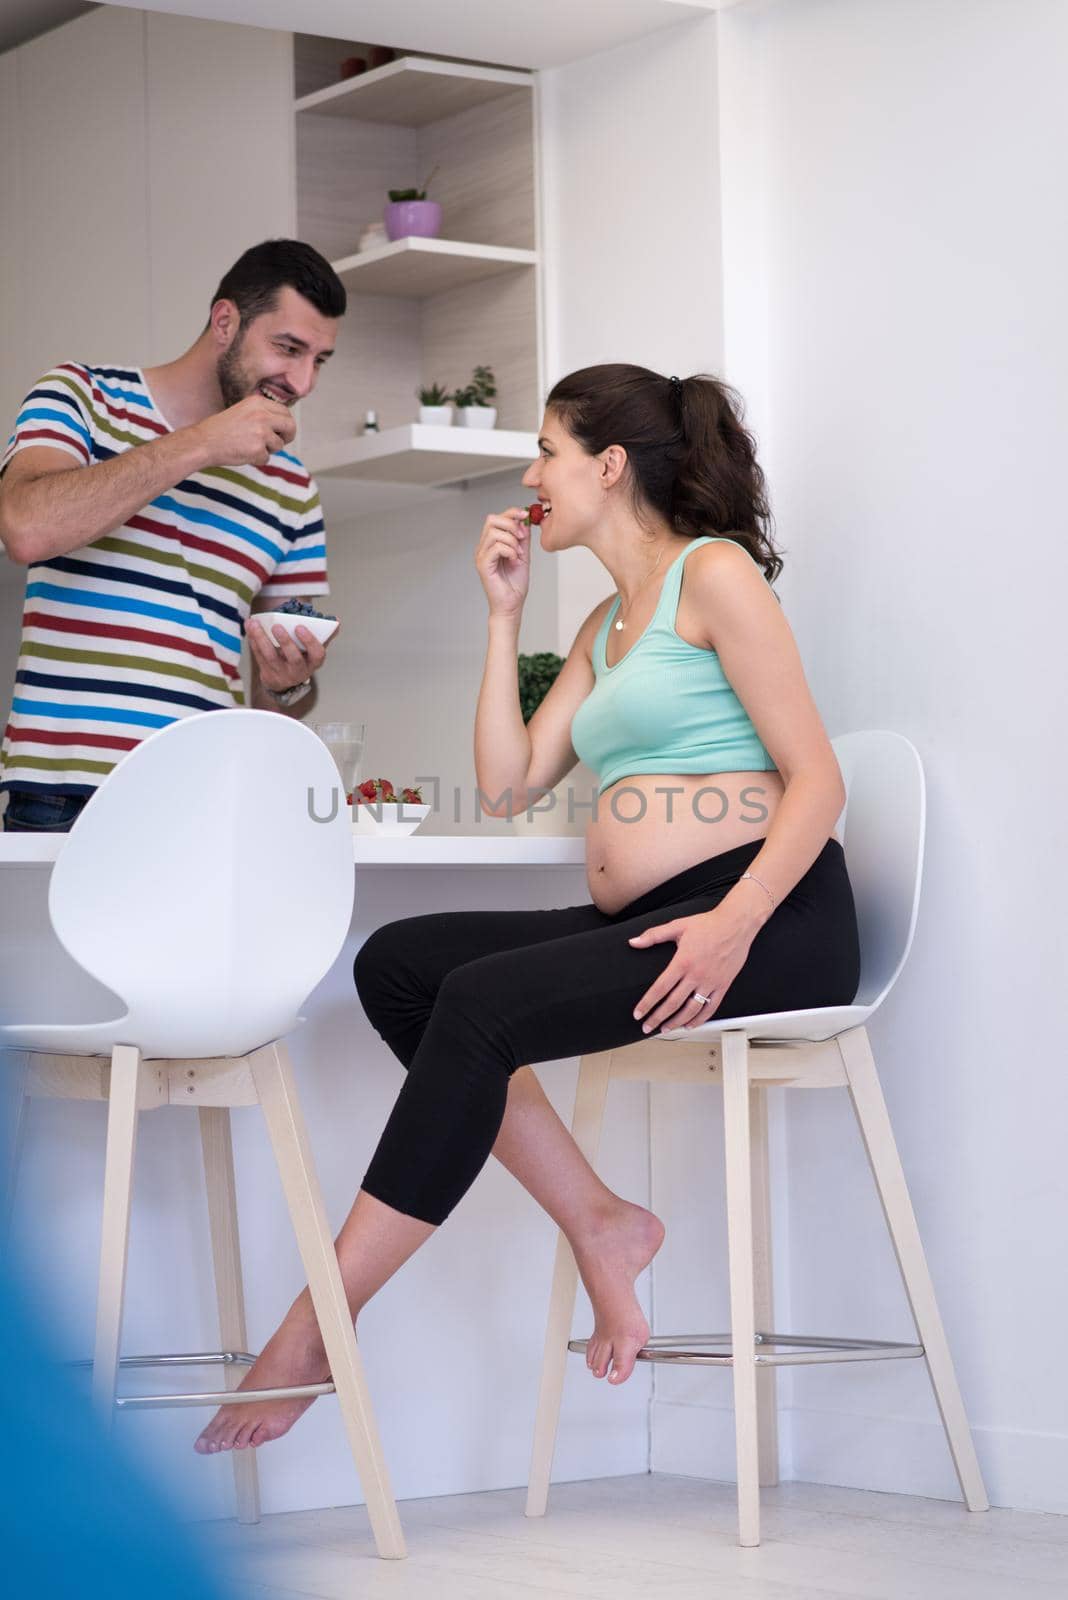 young pregnant couple eating strawberries at kitchen, lifestyle healthy pregnancy happy life concept